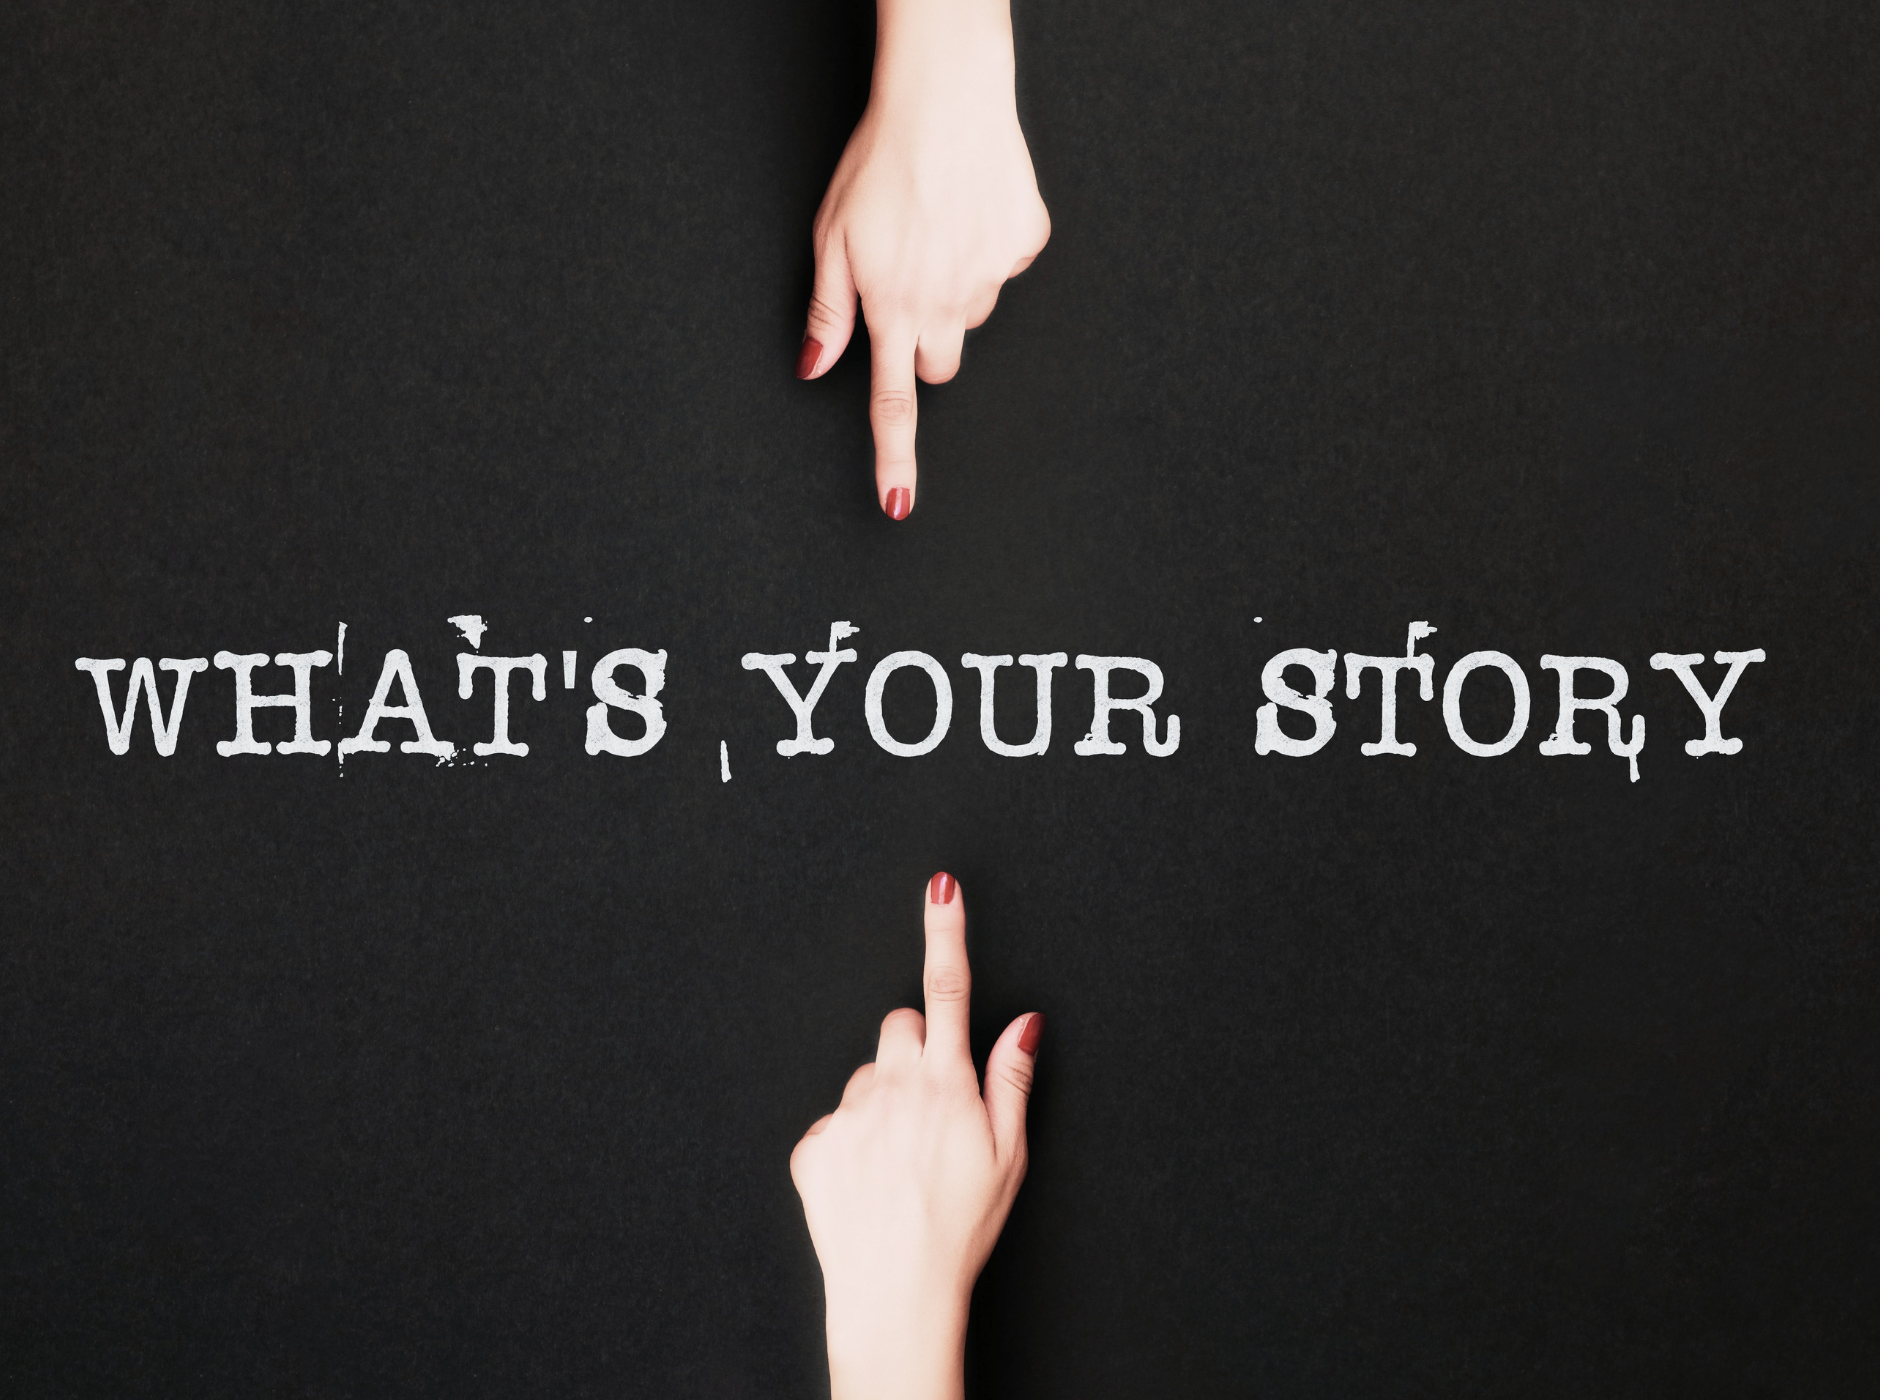 hands pointing to the words, "What's Your Story?"